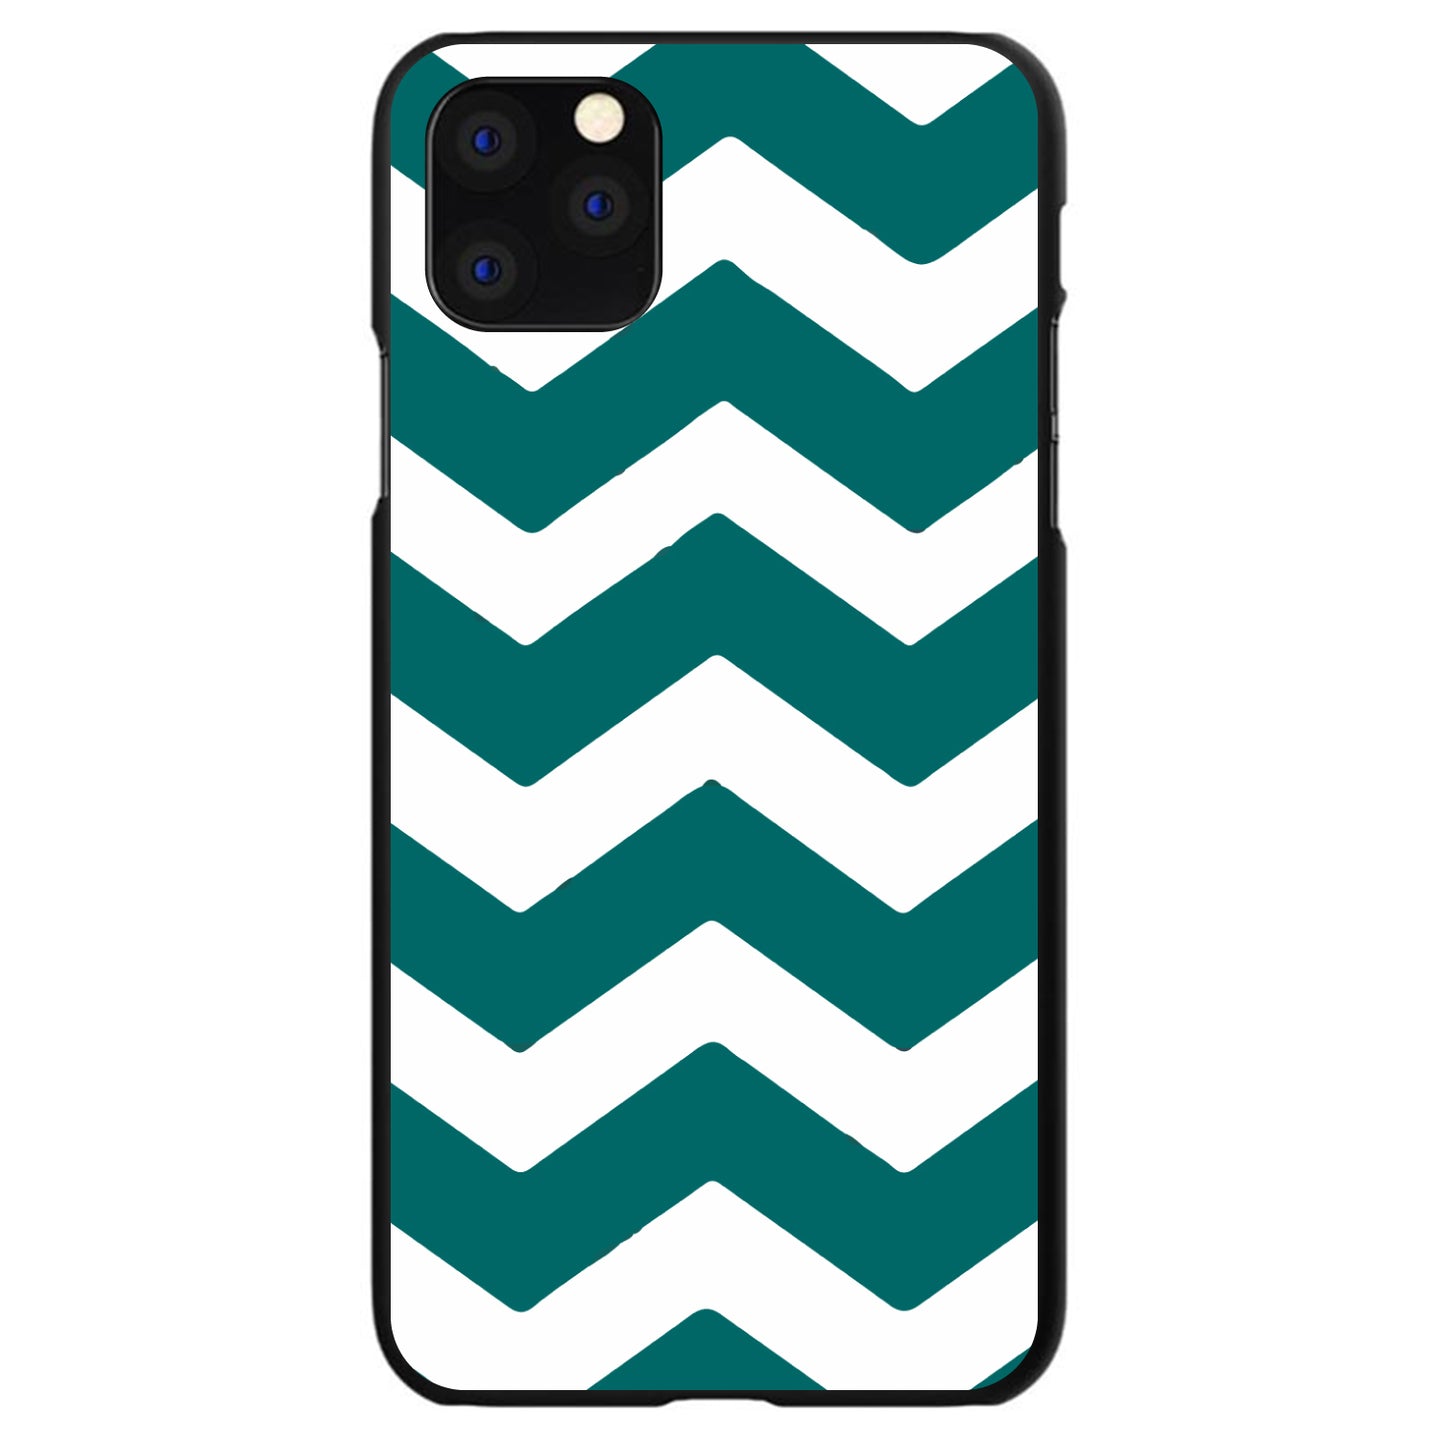 DistinctInk® Hard Plastic Snap-On Case for Apple iPhone or Samsung Galaxy - Teal White Chevron Stripes